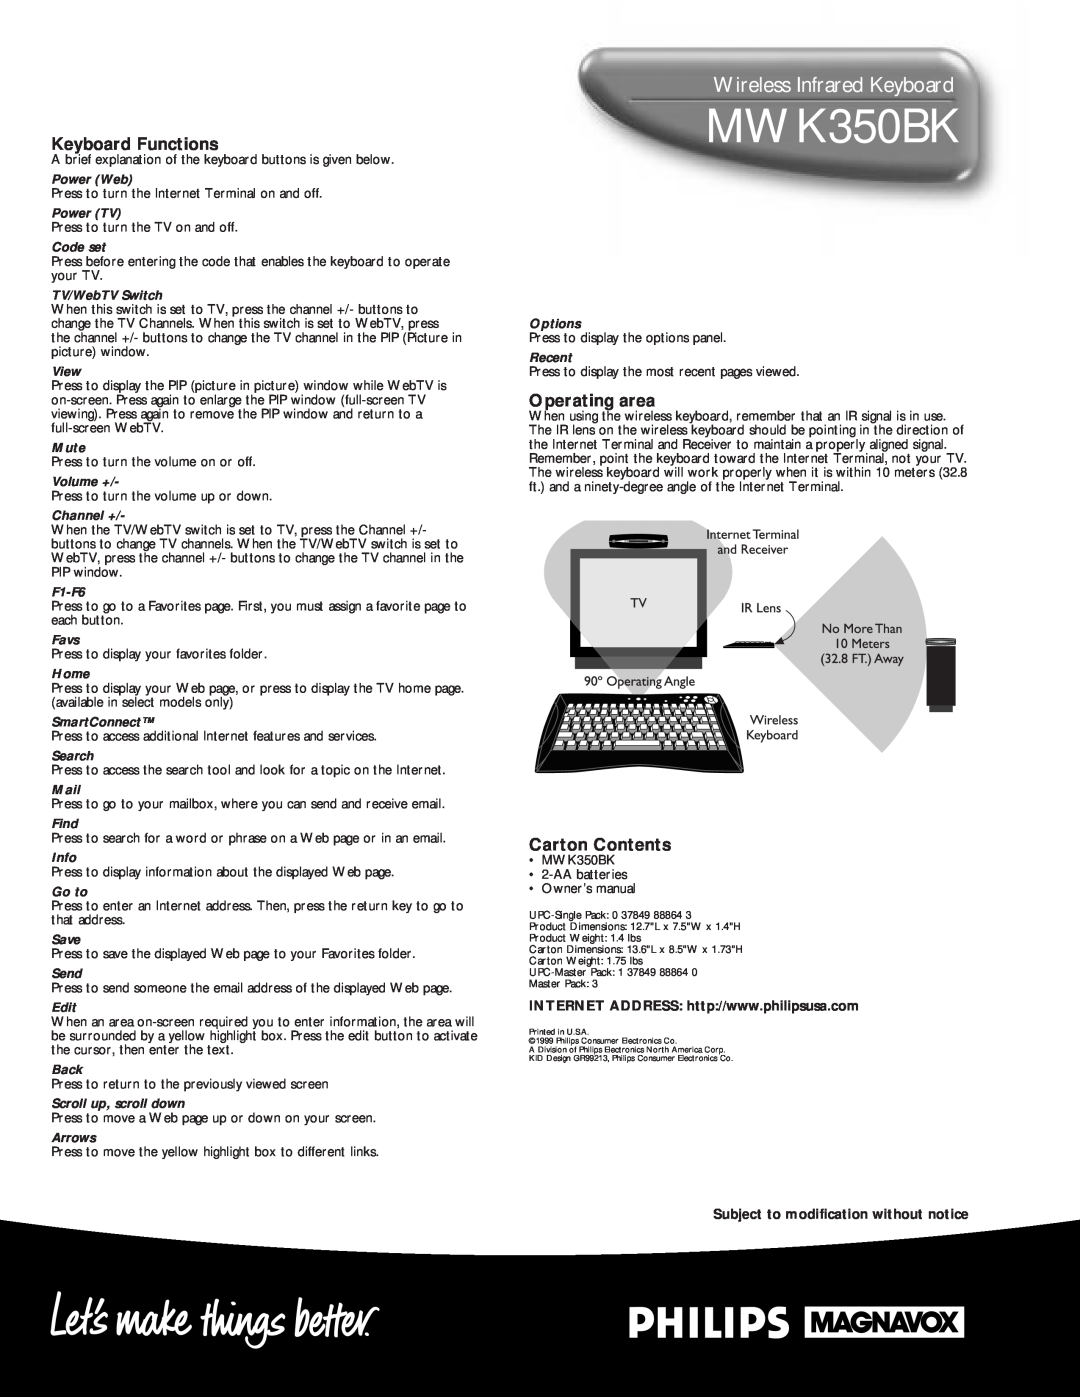 Philips MWK350BK manual Wireless Infrared Keyboard, Keyboard Functions, Operating area, Carton Contents 